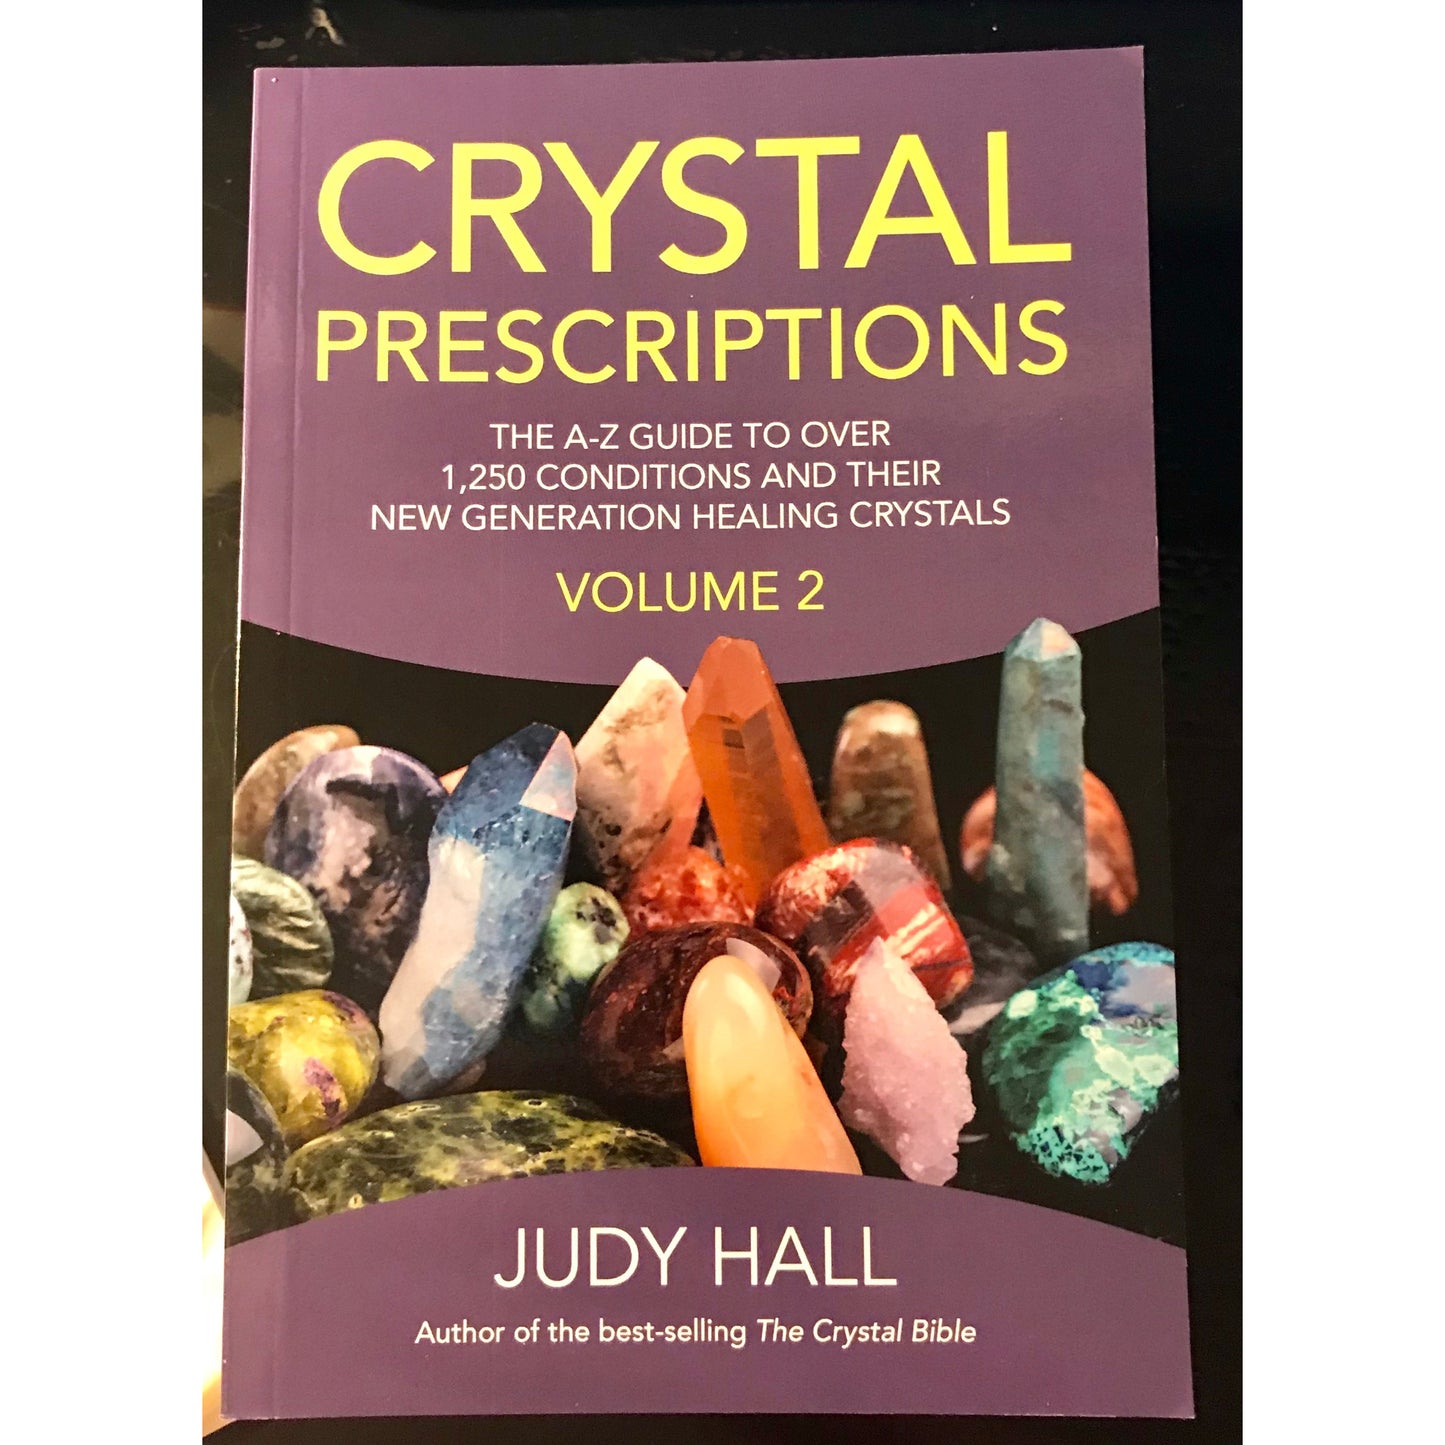 Crystal Prescriptions, Volume 2 by Best-Selling Author Judy Hall